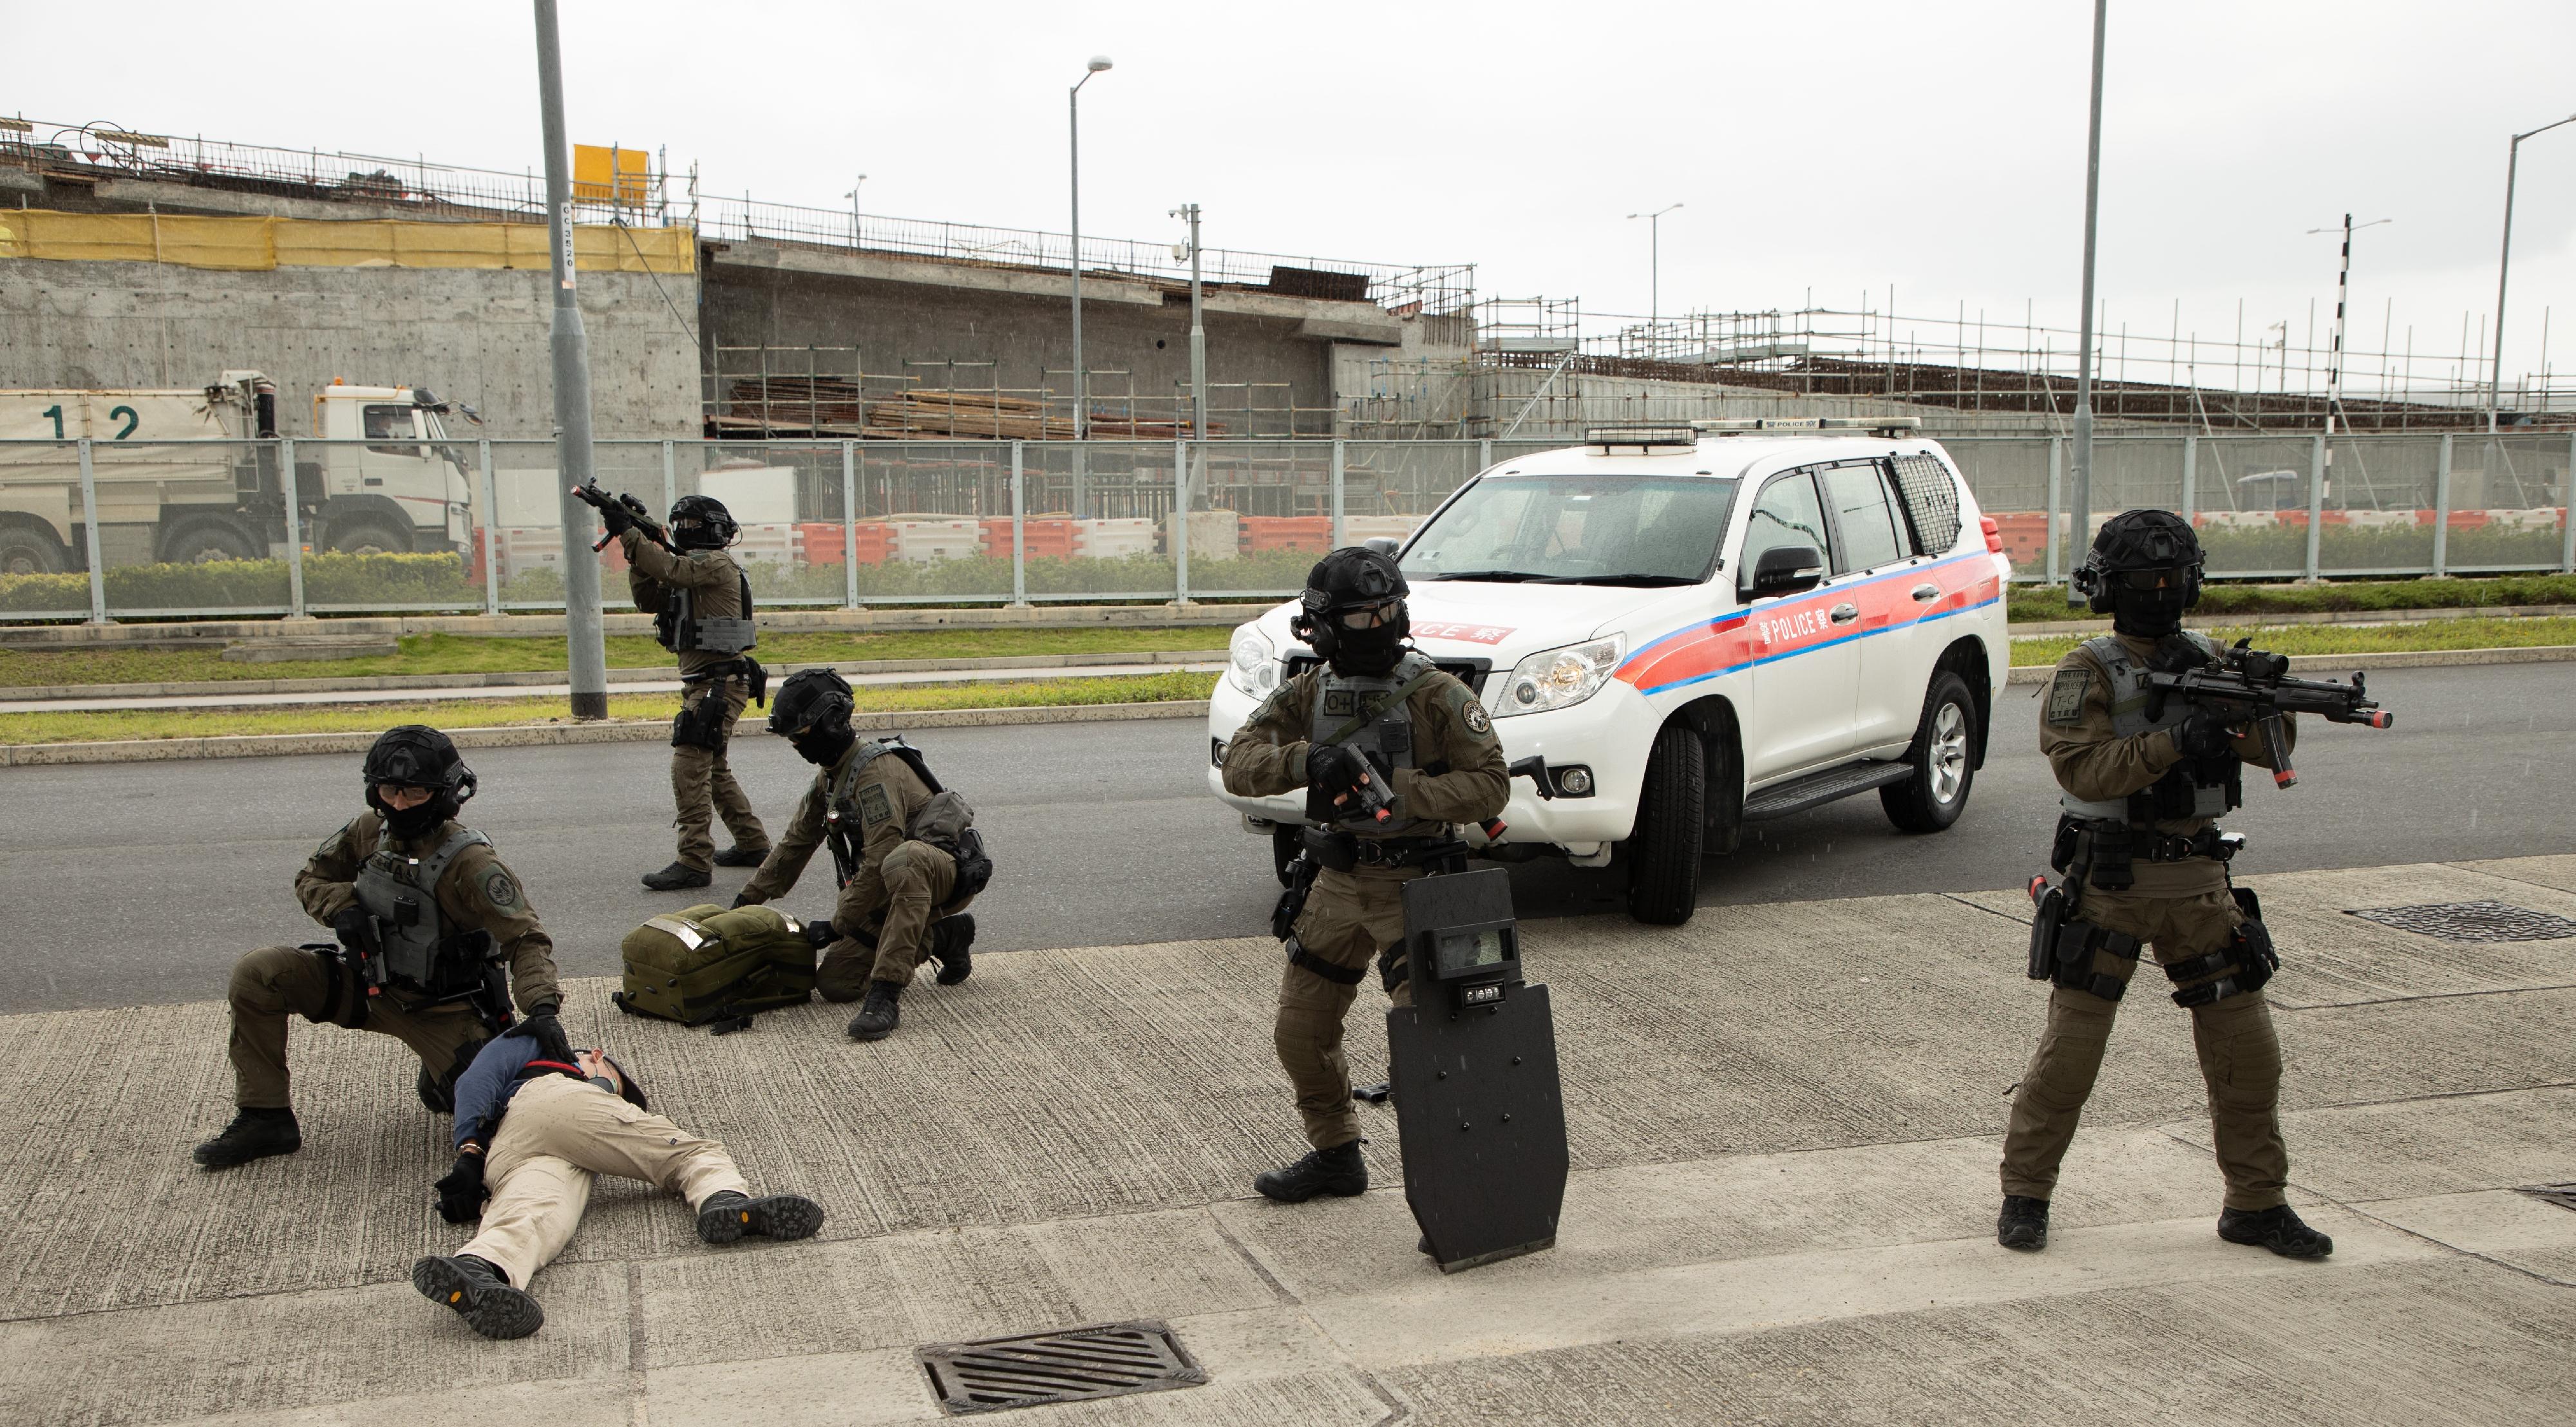 The Fire Services Department and the Hong Kong Police Force (HKPF) jointly held a counter-terrorism and hazardous material incident exercise code-named "DEFENCE" this morning (May 31) at the cross-boundary coach parking bay outside the Passenger Clearance Building of the Hong Kong-Zhuhai-Macao Bridge Hong Kong Port. Photo shows members of the Counter Terrorism Response Unit of the HKPF intercepting a suspicious vehicle and subduing a male adult who had attempted to launch a terrorist attack in the simulation.